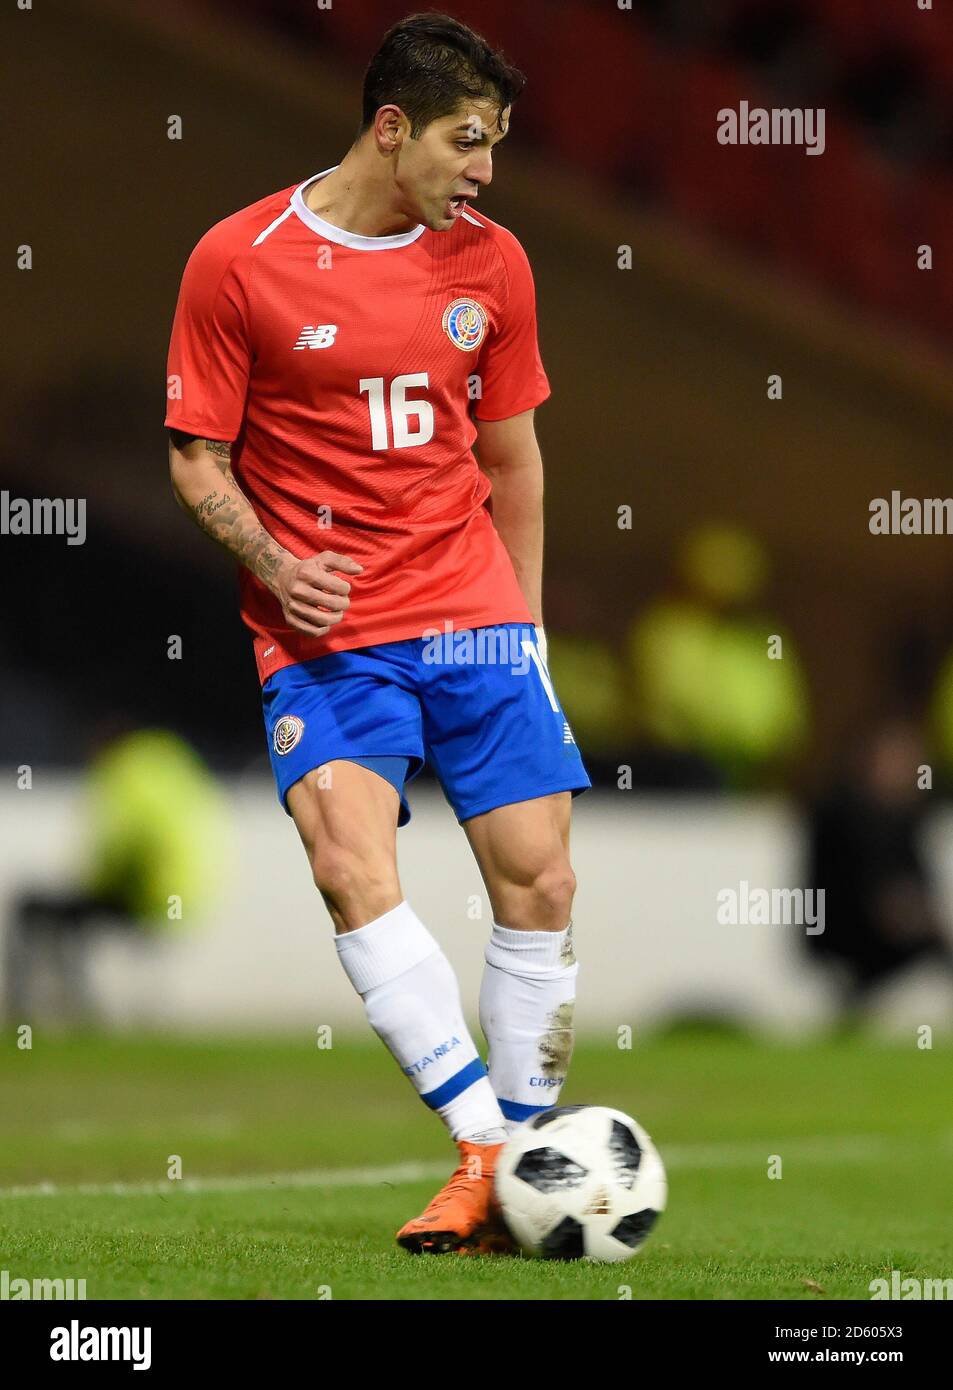 Costa Rica's Christian Gamboa in action  during the international friendly match at Hampden Park, Glasgow Stock Photo